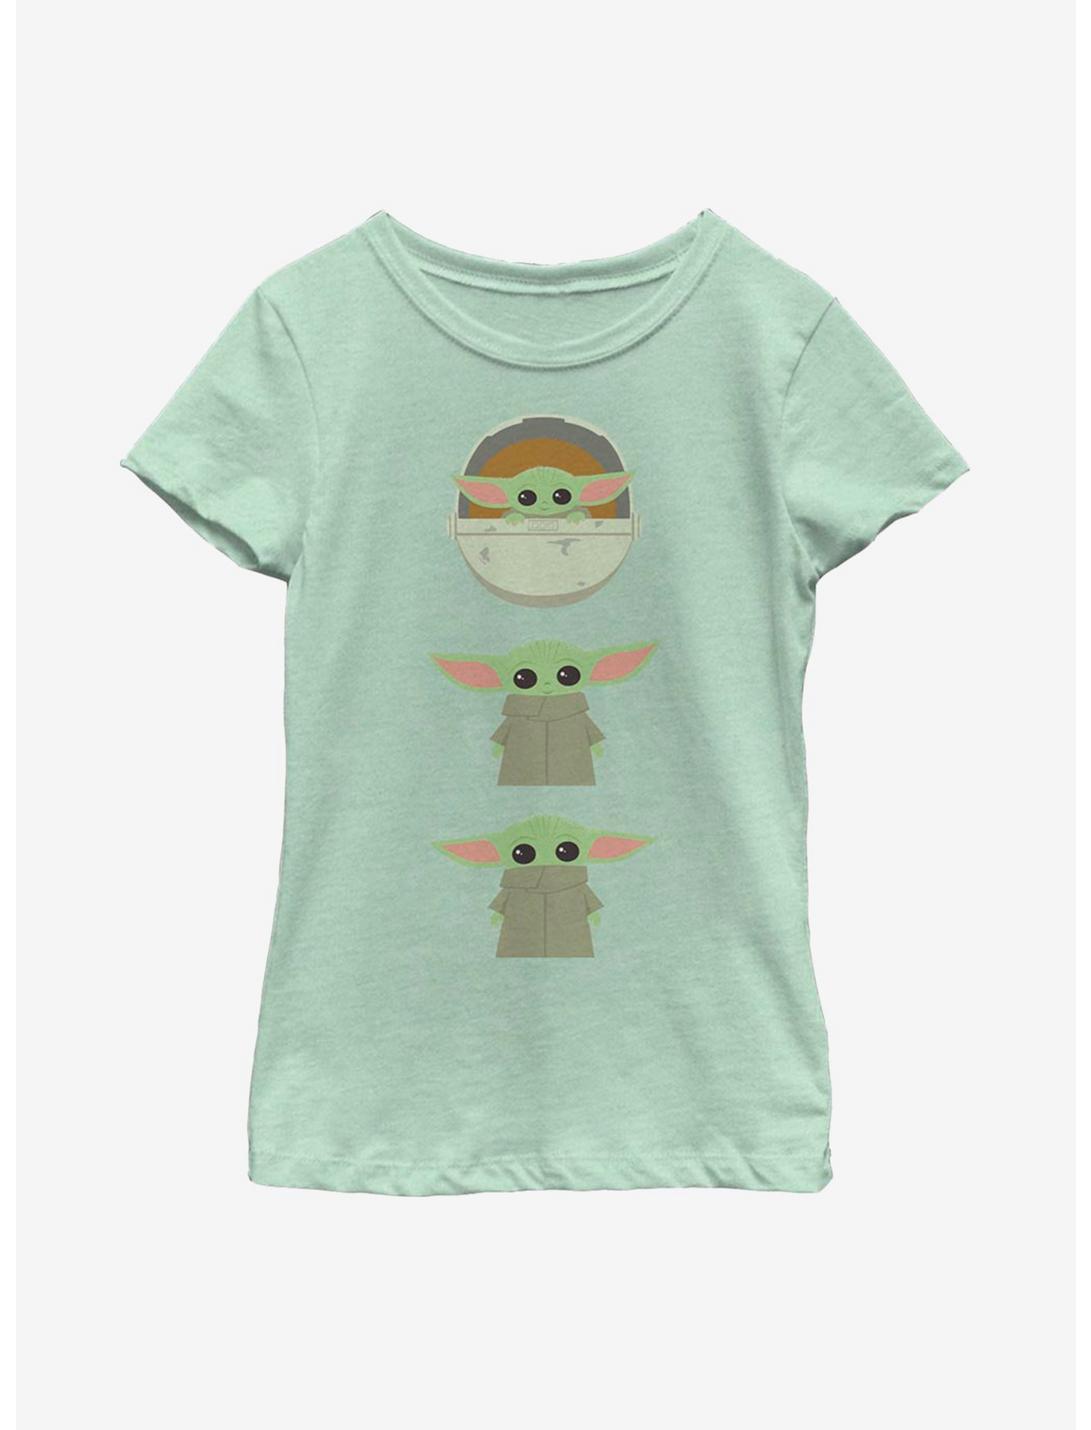 Star Wars The Mandalorian The Child Stack Youth Girls T-Shirt, MINT, hi-res